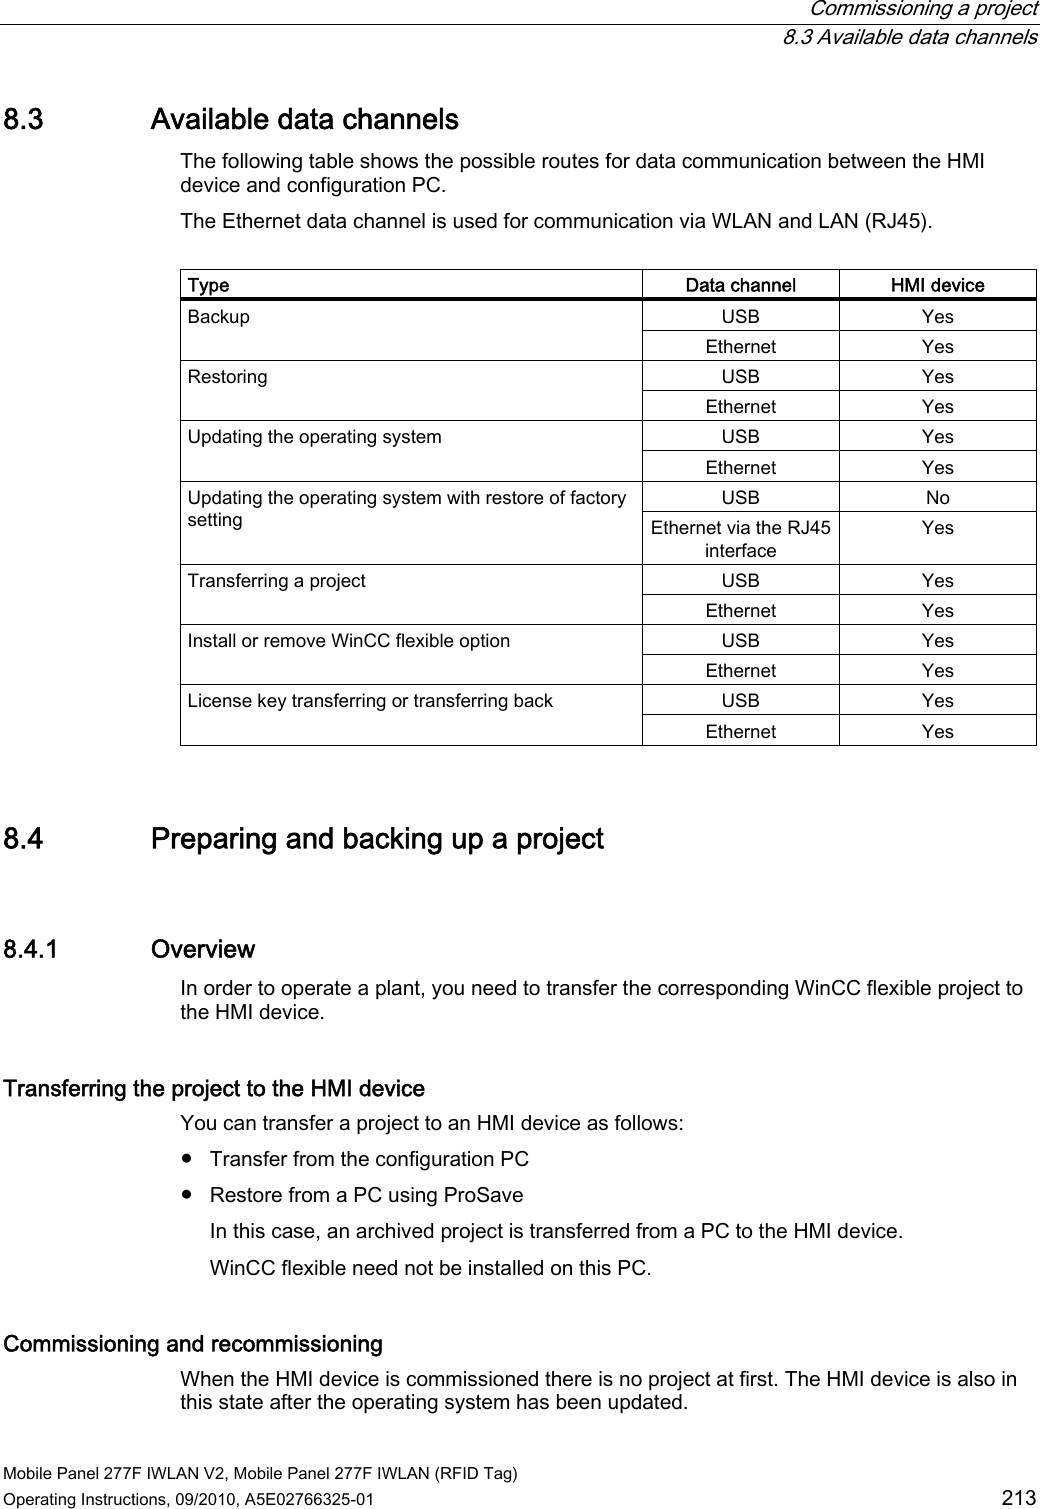  Commissioning a project  8.3 Available data channels Mobile Panel 277F IWLAN V2, Mobile Panel 277F IWLAN (RFID Tag) Operating Instructions, 09/2010, A5E02766325-01  213 8.3 Available data channels The following table shows the possible routes for data communication between the HMI device and configuration PC. The Ethernet data channel is used for communication via WLAN and LAN (RJ45).  Type  Data channel  HMI device USB  Yes Backup  Ethernet   Yes USB  Yes Restoring  Ethernet  Yes USB  Yes Updating the operating system  Ethernet  Yes USB  No Updating the operating system with restore of factory setting   Ethernet via the RJ45 interface  Yes USB  Yes Transferring a project  Ethernet  Yes USB  Yes Install or remove WinCC flexible option  Ethernet  Yes USB  Yes License key transferring or transferring back  Ethernet  Yes 8.4 Preparing and backing up a project 8.4.1 Overview In order to operate a plant, you need to transfer the corresponding WinCC flexible project to the HMI device. Transferring the project to the HMI device  You can transfer a project to an HMI device as follows: ● Transfer from the configuration PC ● Restore from a PC using ProSave In this case, an archived project is transferred from a PC to the HMI device. WinCC flexible need not be installed on this PC. Commissioning and recommissioning  When the HMI device is commissioned there is no project at first. The HMI device is also in this state after the operating system has been updated. REVIEW ENGLISH 27.07.2010